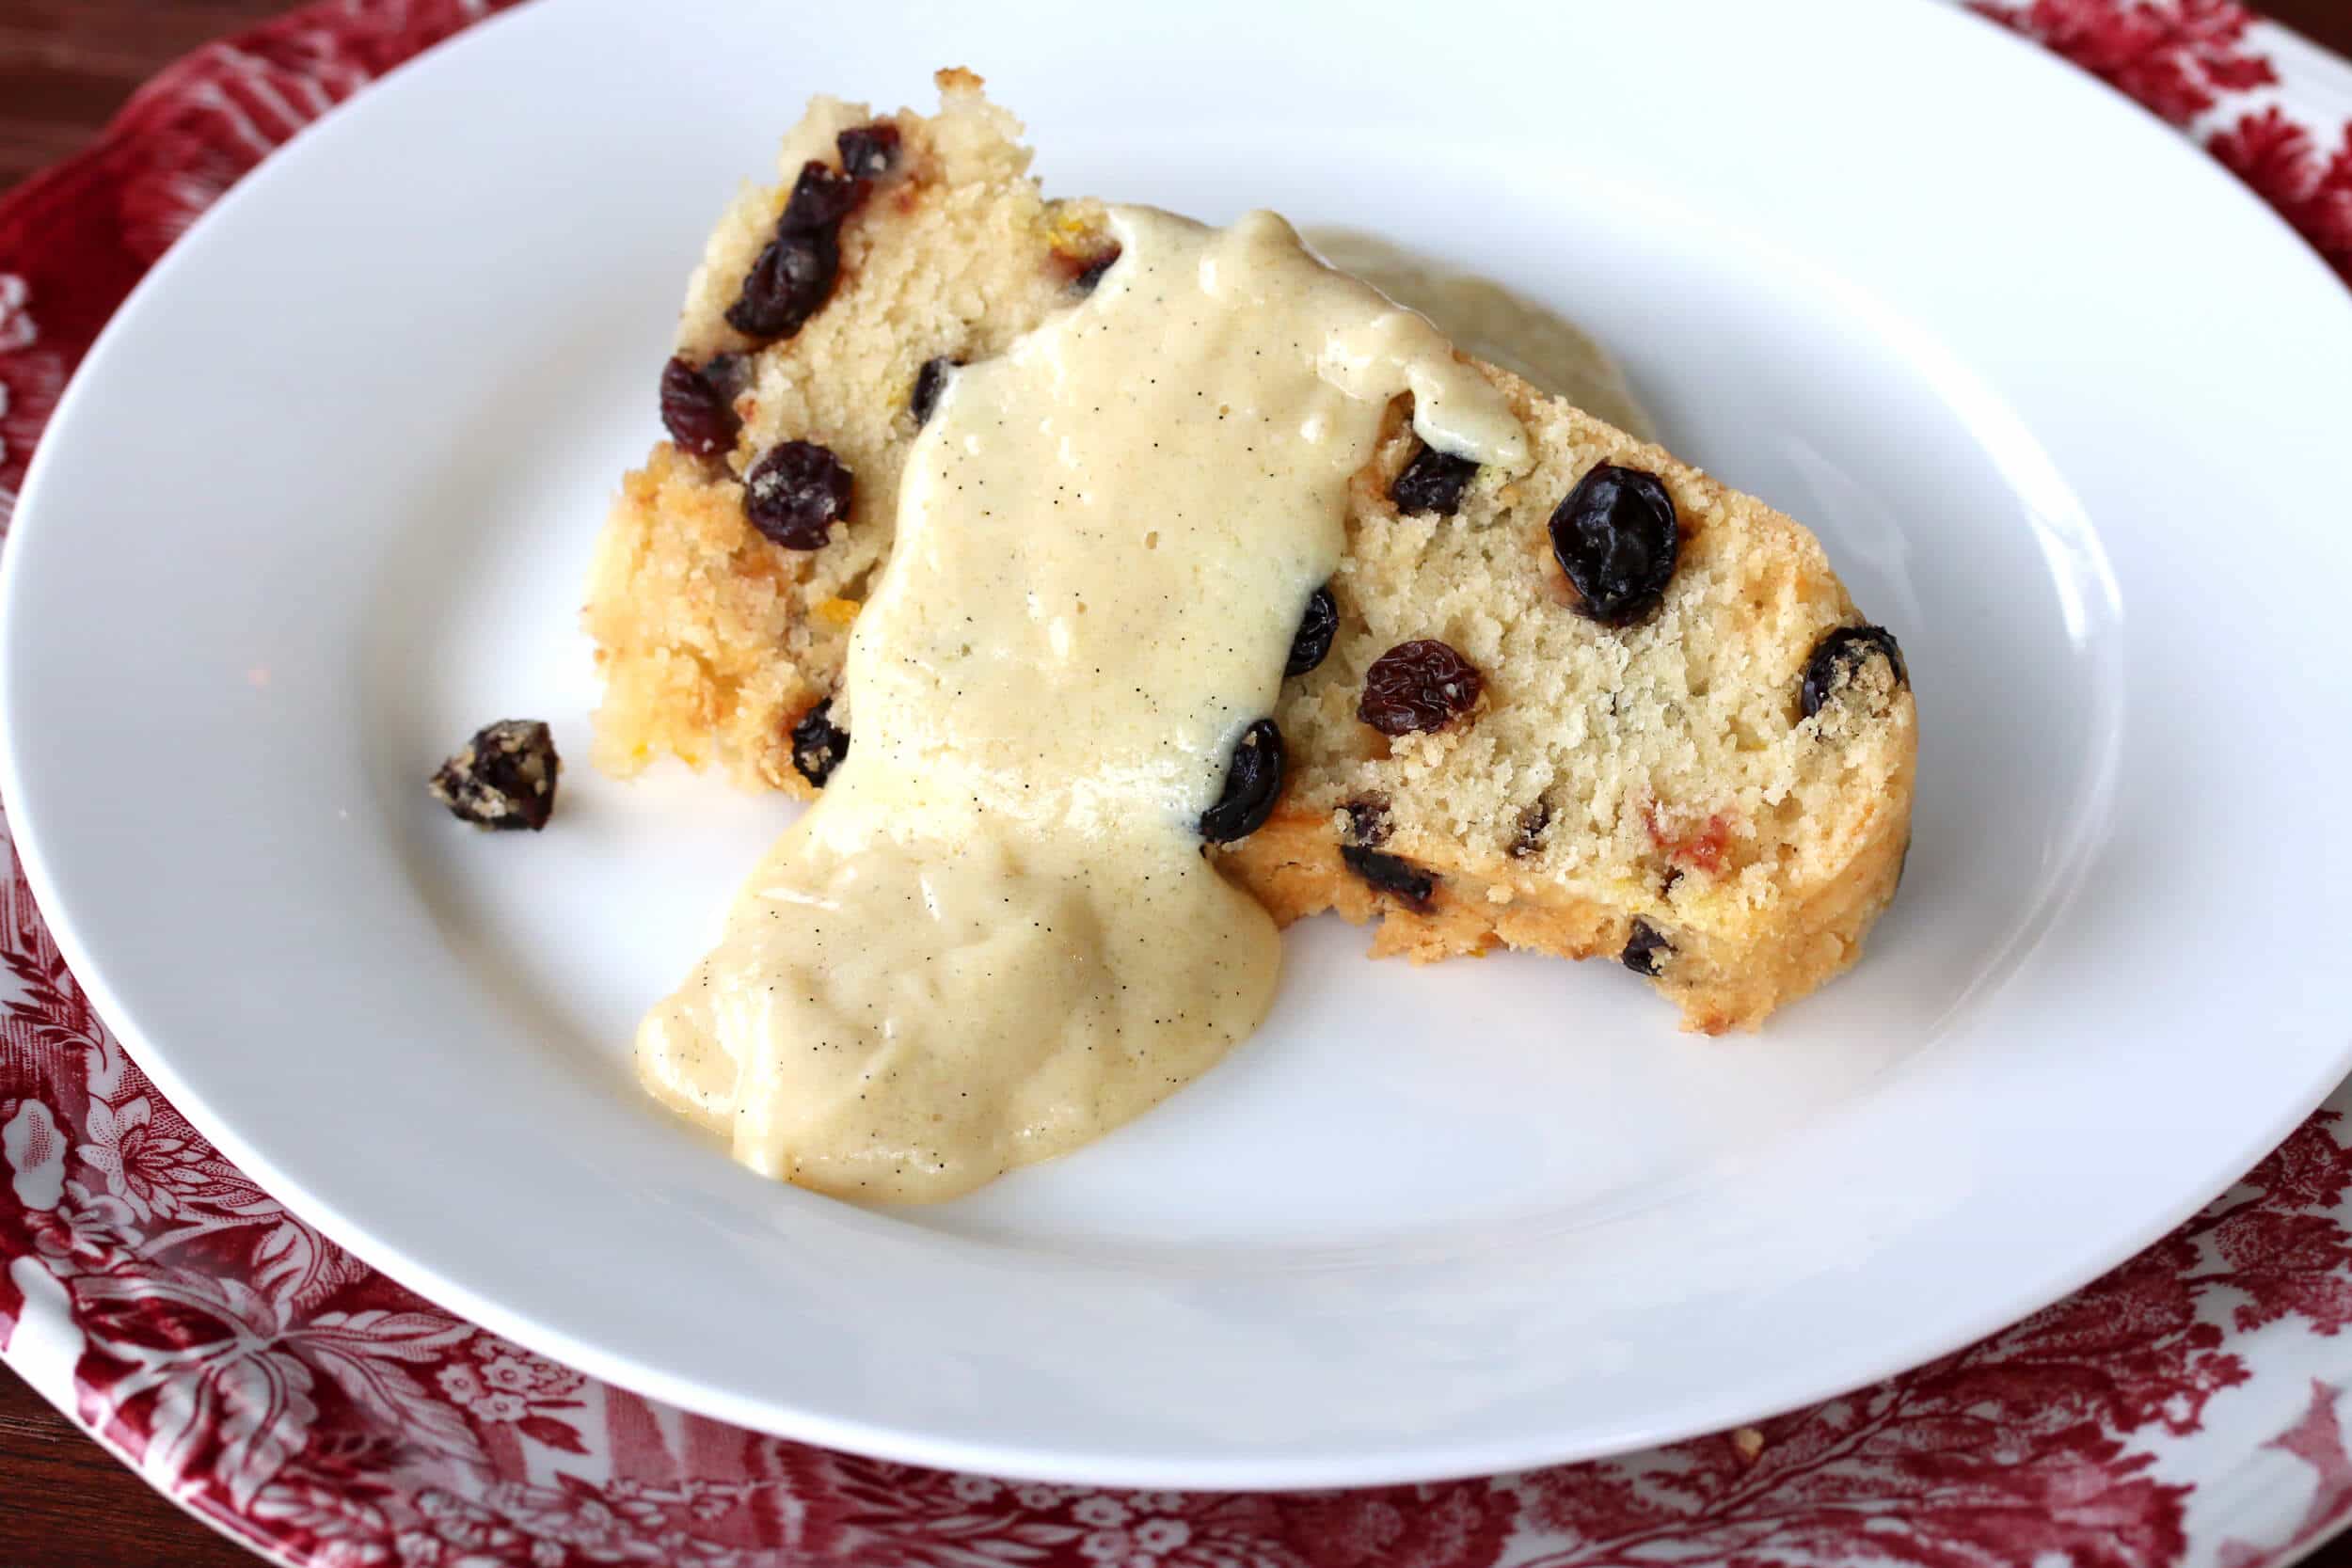 spotted dick recipe authentic traditional best english original currants custard suet butter steamed pudding british